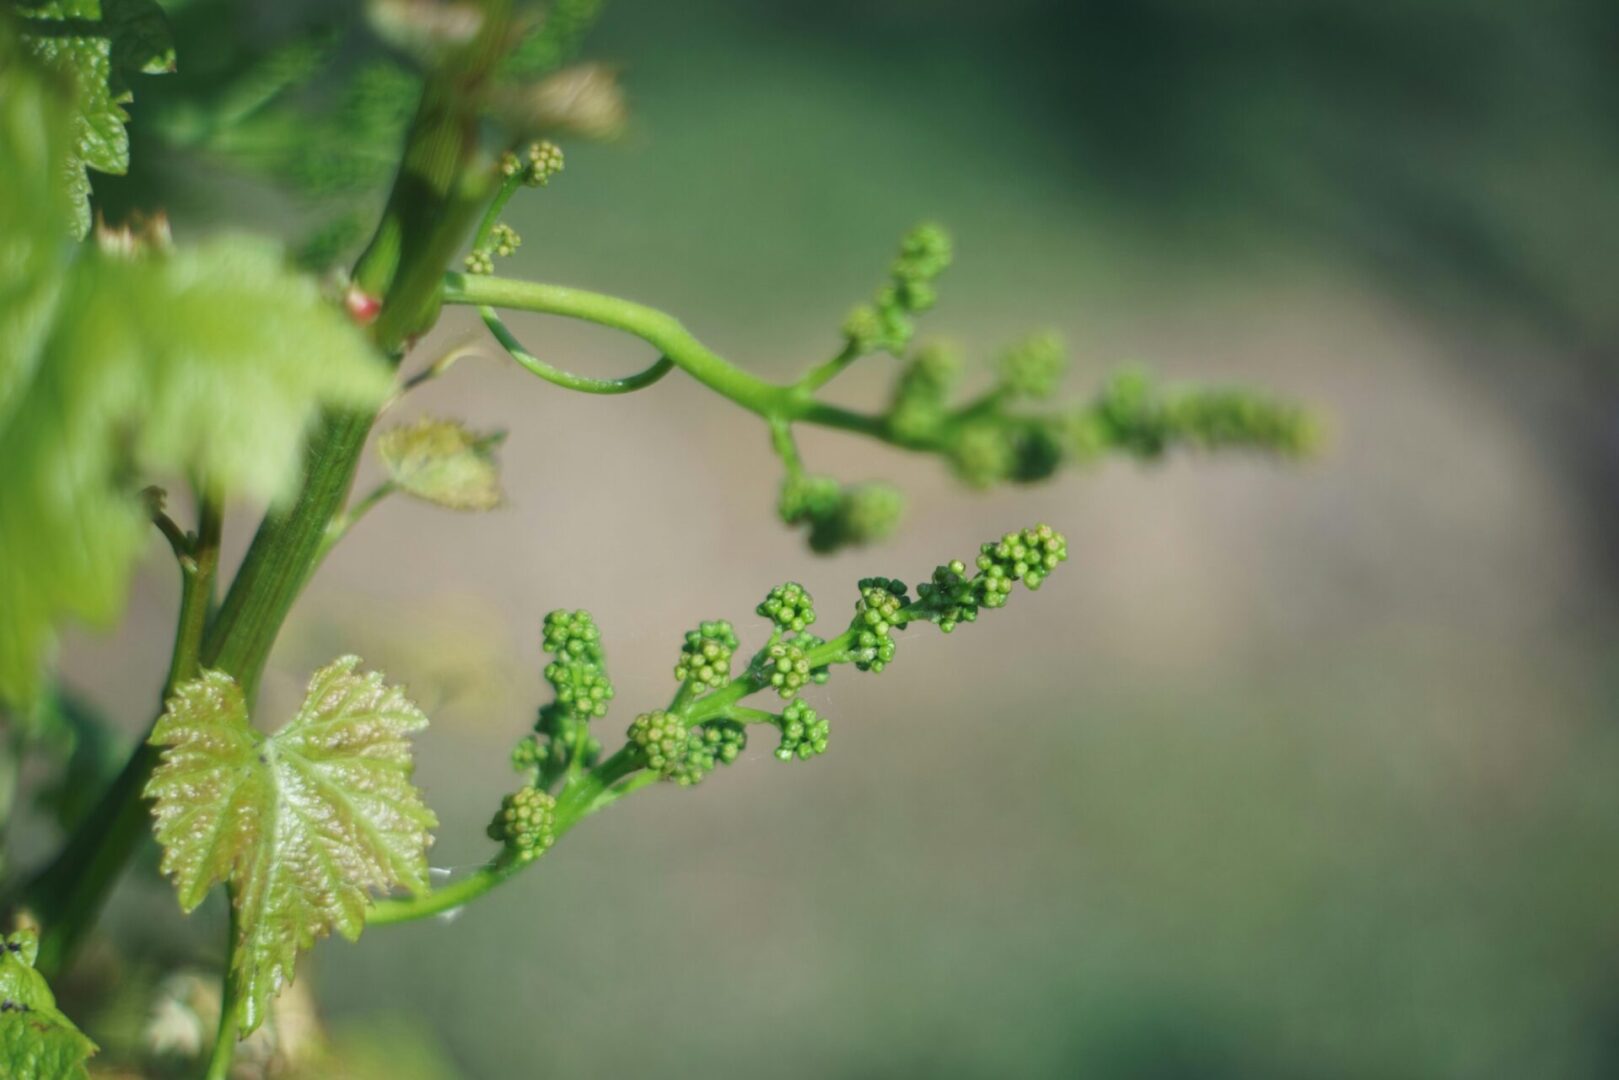 Baby Grapes on Vine